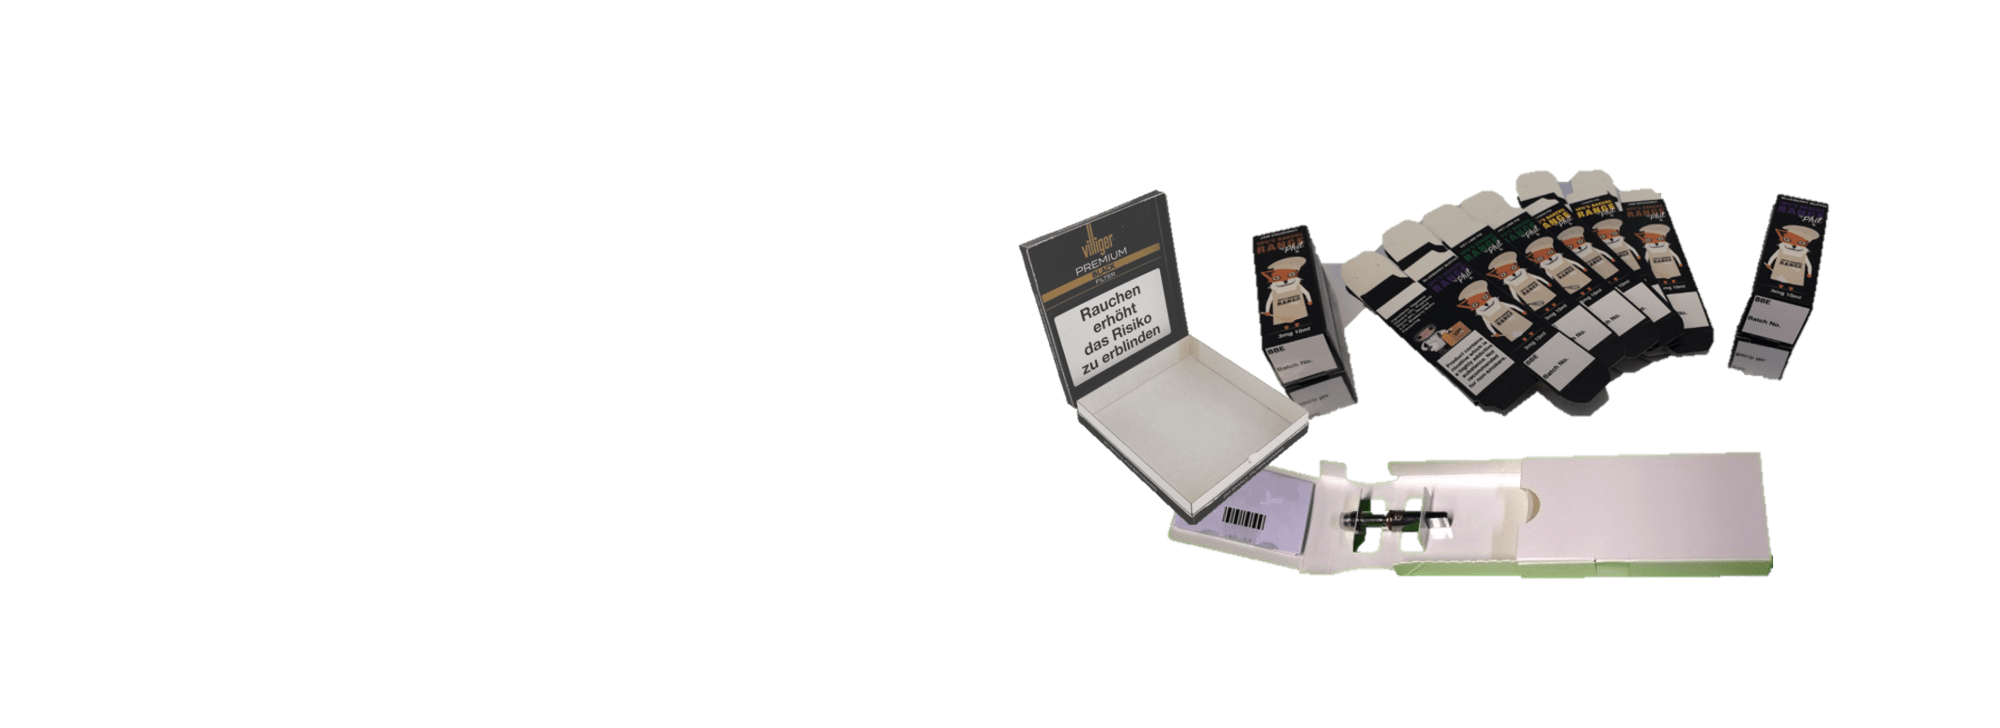 WestRock produces advanced packaging for tobacco products